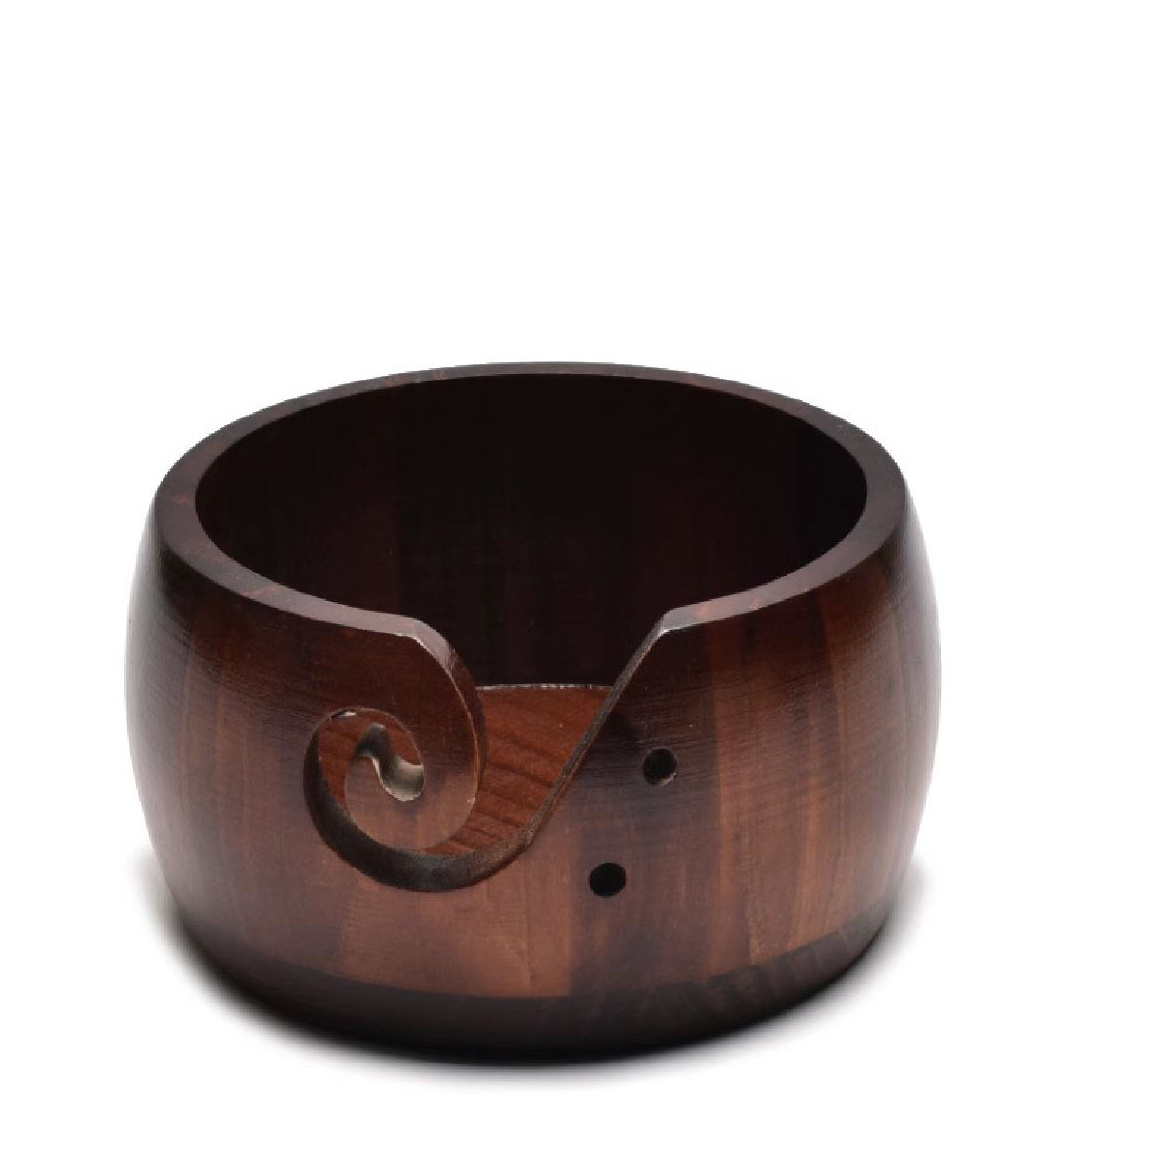  Joyeee Handmade Yarn Bowl, 6.3'' Crafted Wooden Yarn Storage  Bowl with Carved Holes & Drills Holes Crocheting Knitting Bowl Yarn Holder  Gift for Knitting Crochet Enthusiasts : Arts, Crafts & Sewing